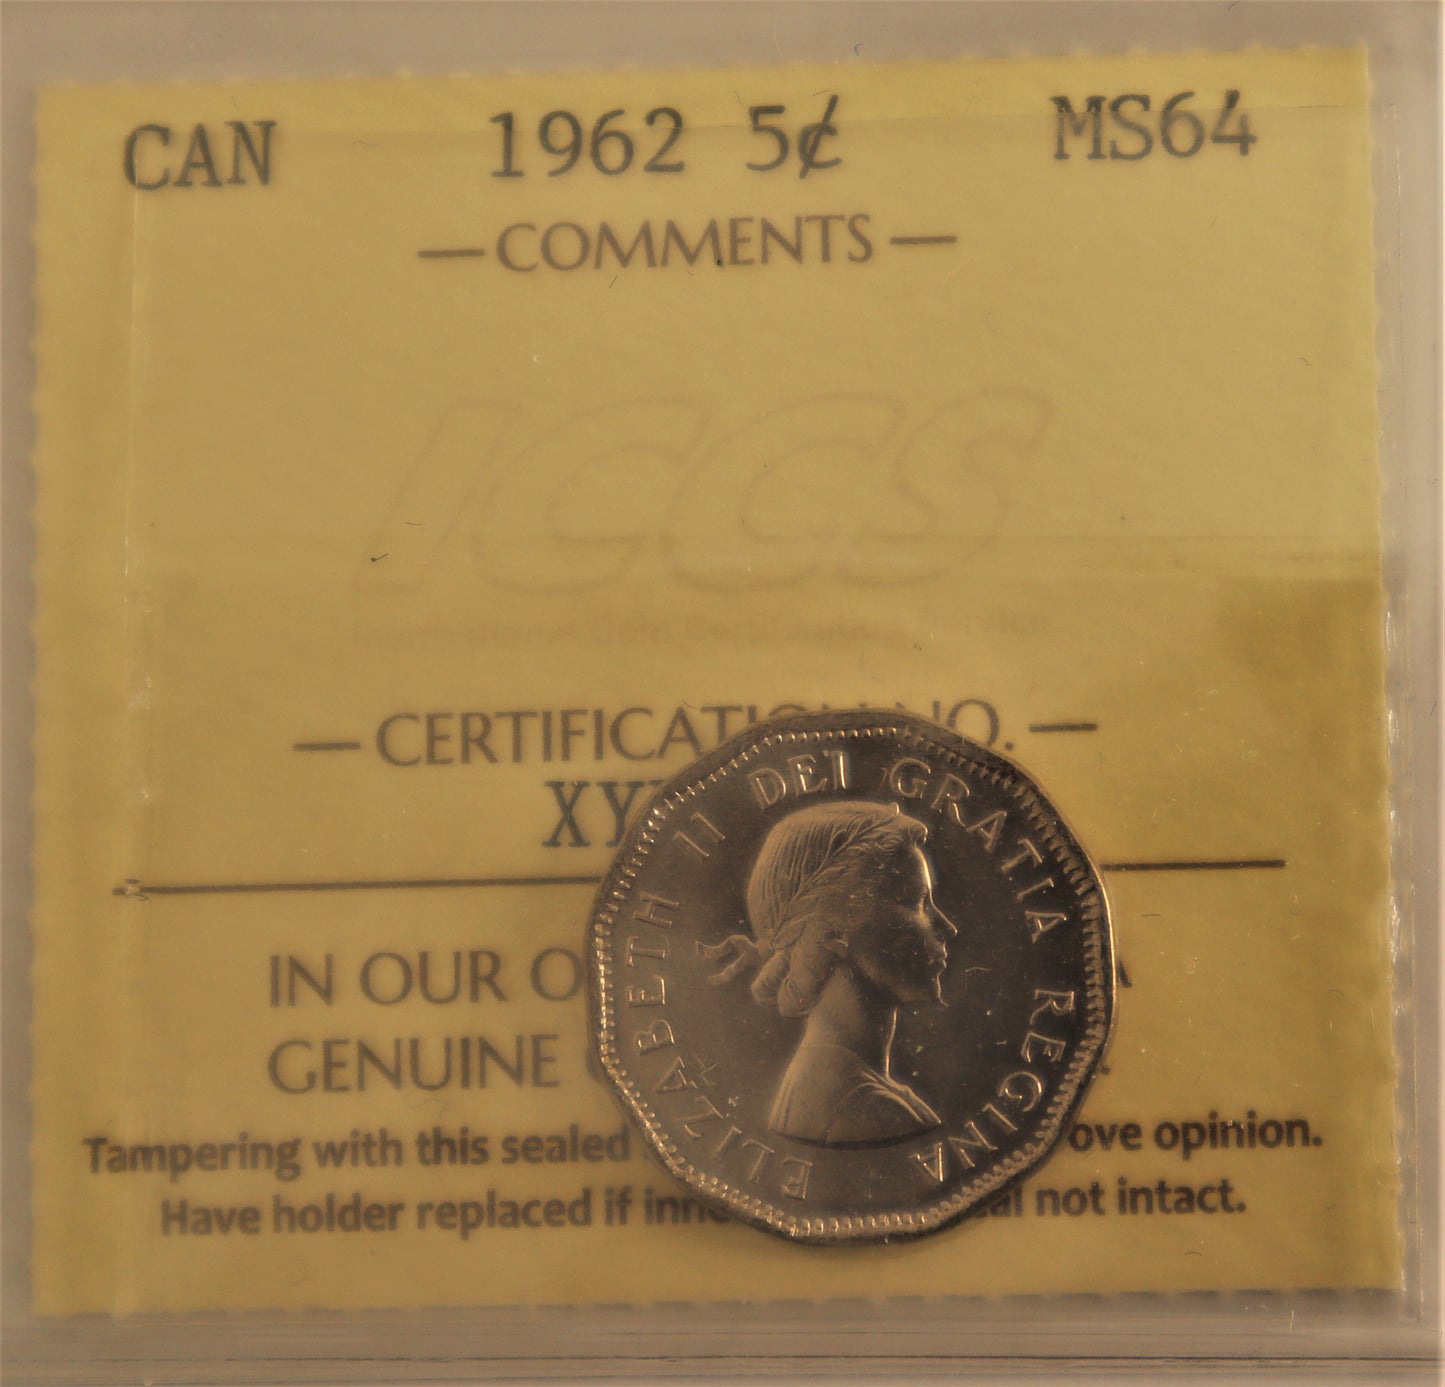 1962 5 Cent Coin ICCS Grade MS-64 Cert# XYL 588